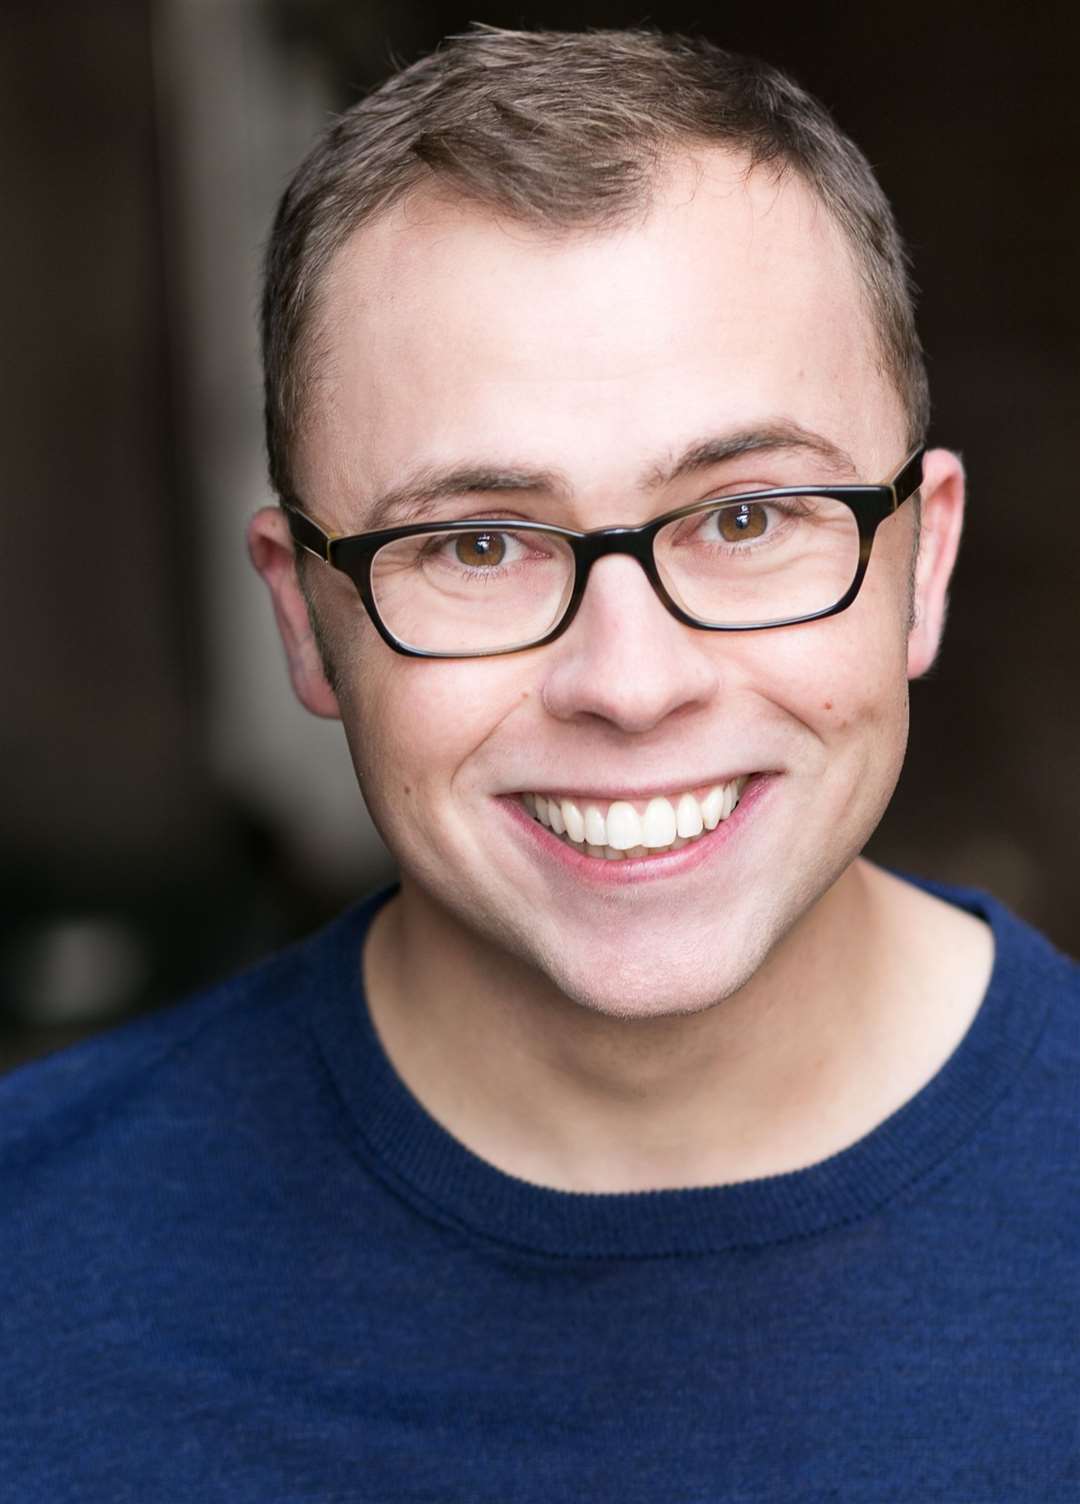 Joe Tracini, who grew up in Higham and went to school in Rochester, is son of Joe Pasquale